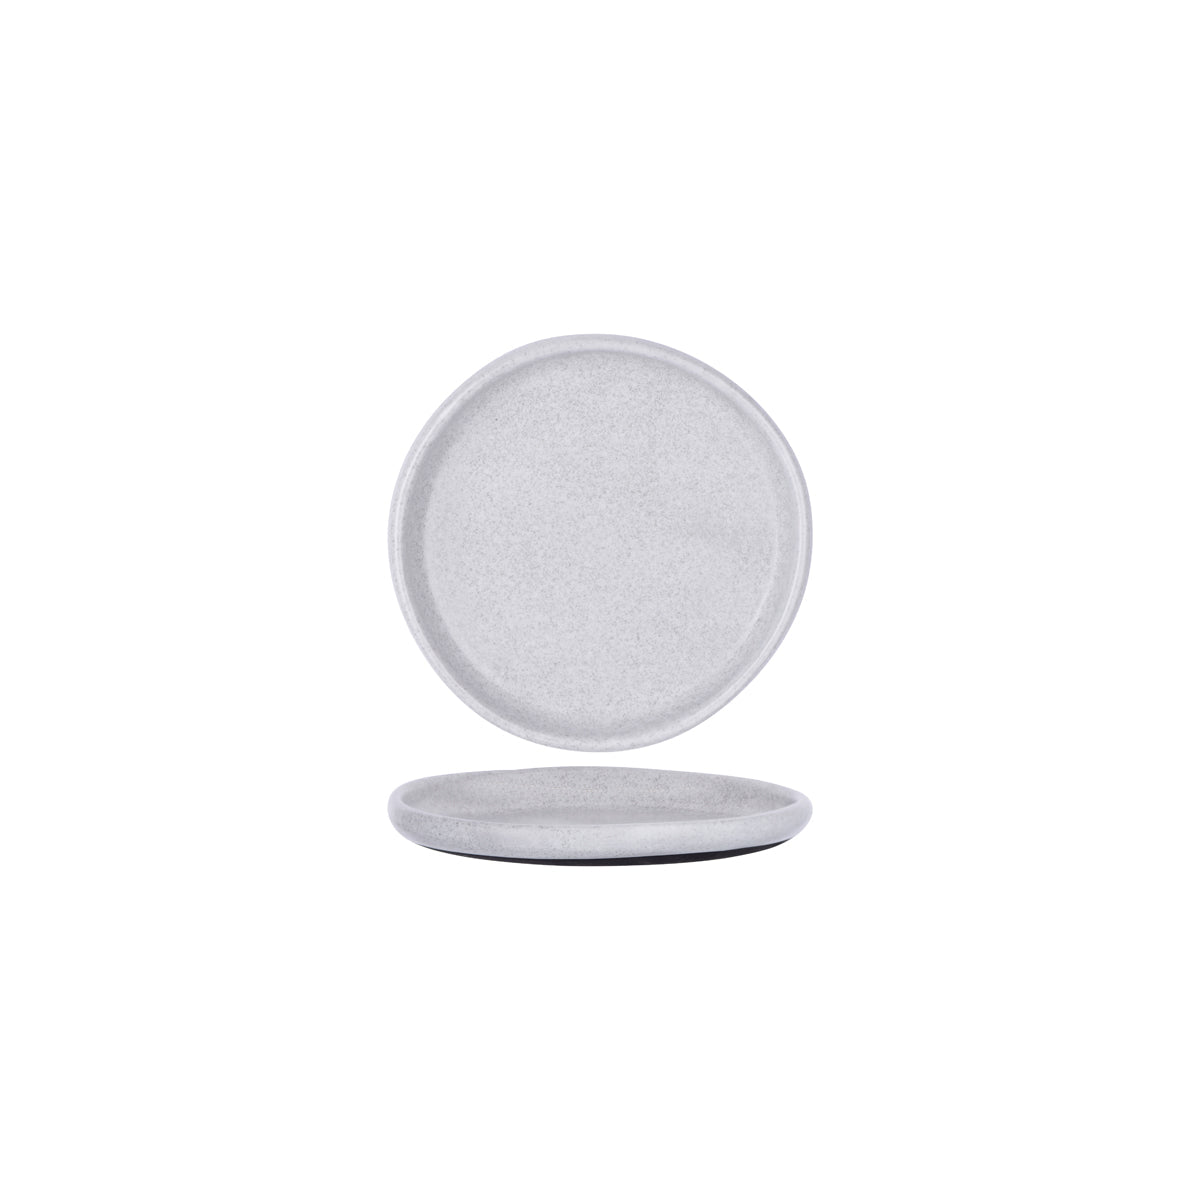 905205 Tablekraft Naturals Ash Grey Round Coupe Plate 205mm Tomkin Australia Hospitality Supplies